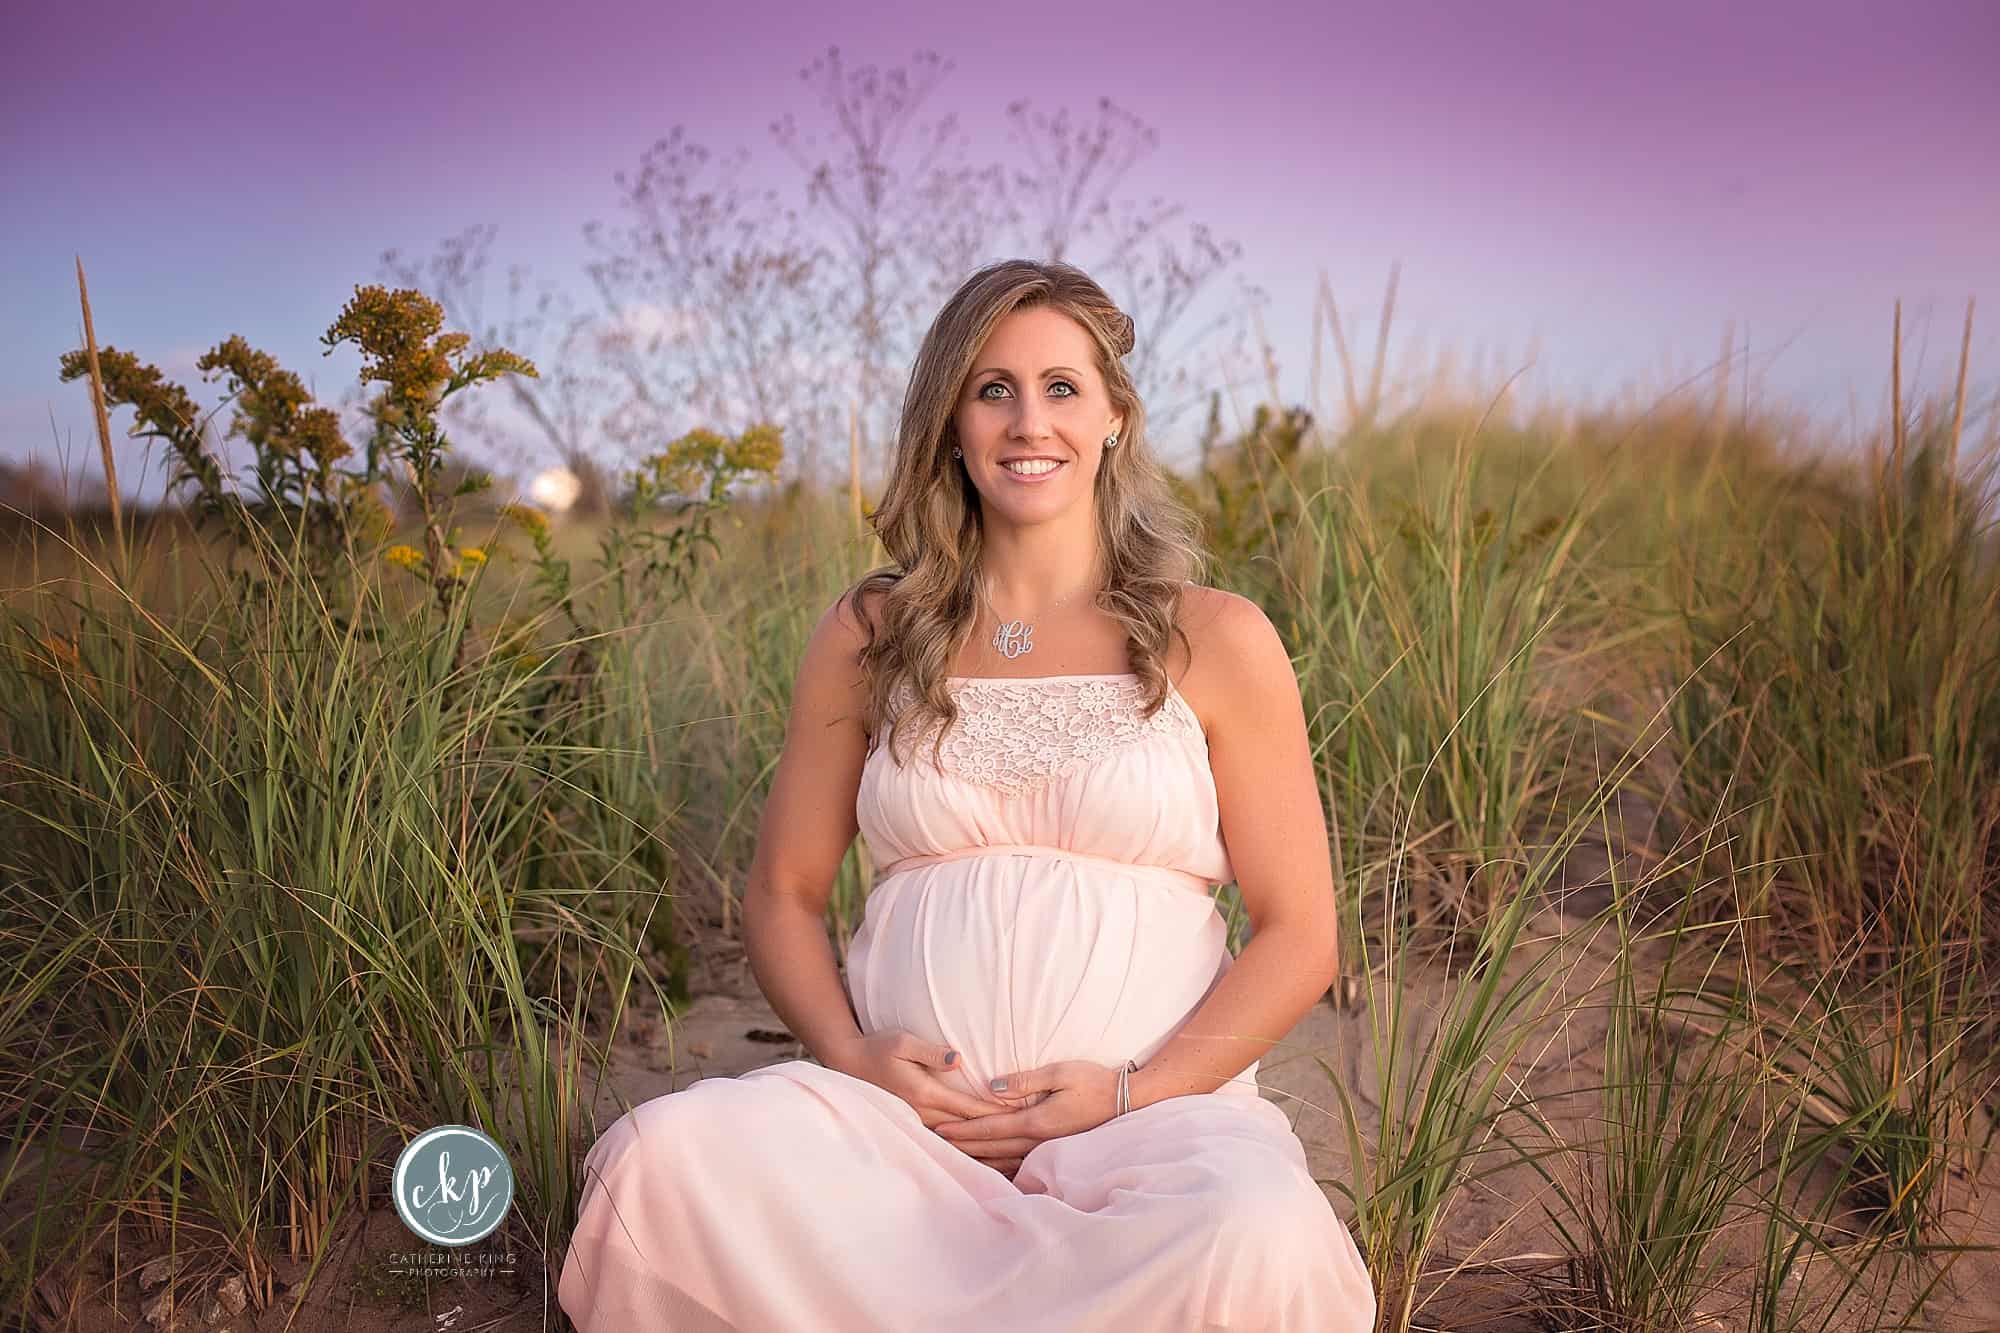 fine art maternity photgoraphy session on the ct shoreline beach with catherine king photography a ct maternity photographer